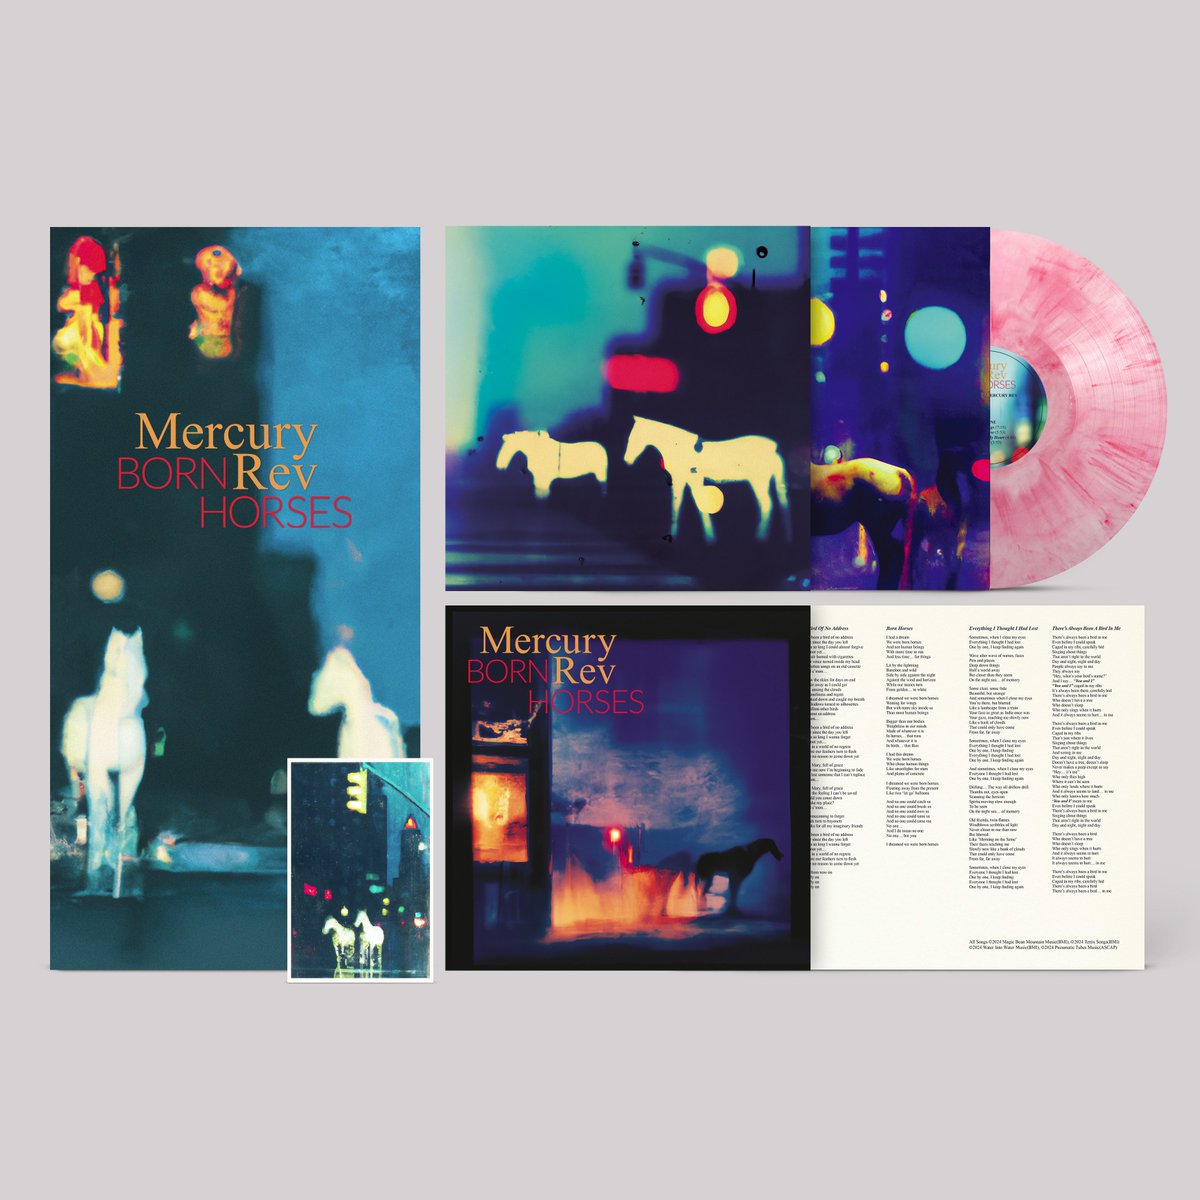 PRE SALE @dinkededition #302 Mercury Rev - 'Born Horses' ● 140g red & white swirl vinyl * ● Alt artwork ‘glow in the dark’ sleeve & pull out poster * ● Signed & hand-numbered postcard * ● 4 page lyric booklet ● Limited pressing of 800 * actionrecords.co.uk/buy/born-horse…